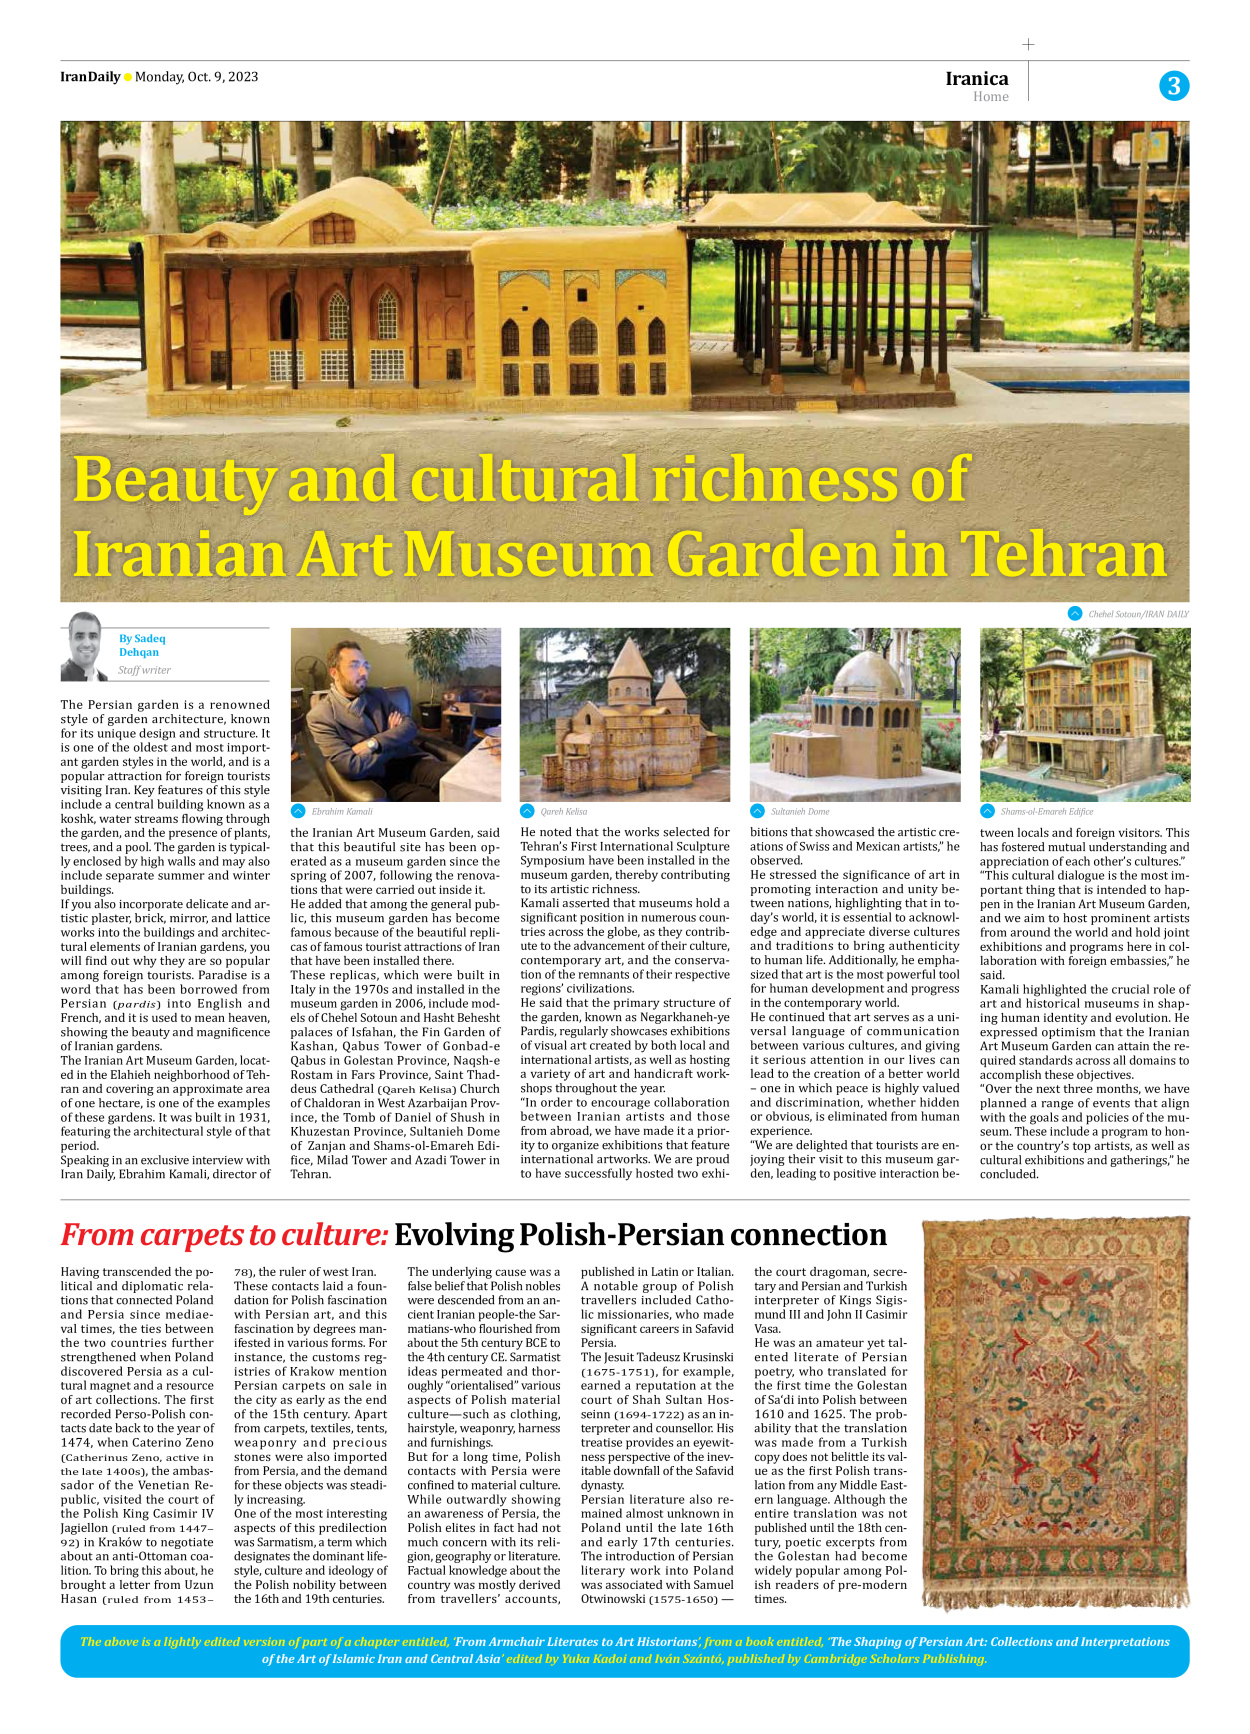 Iran Daily - Number Seven Thousand Four Hundred and Three - 09 October 2023 - Page 3